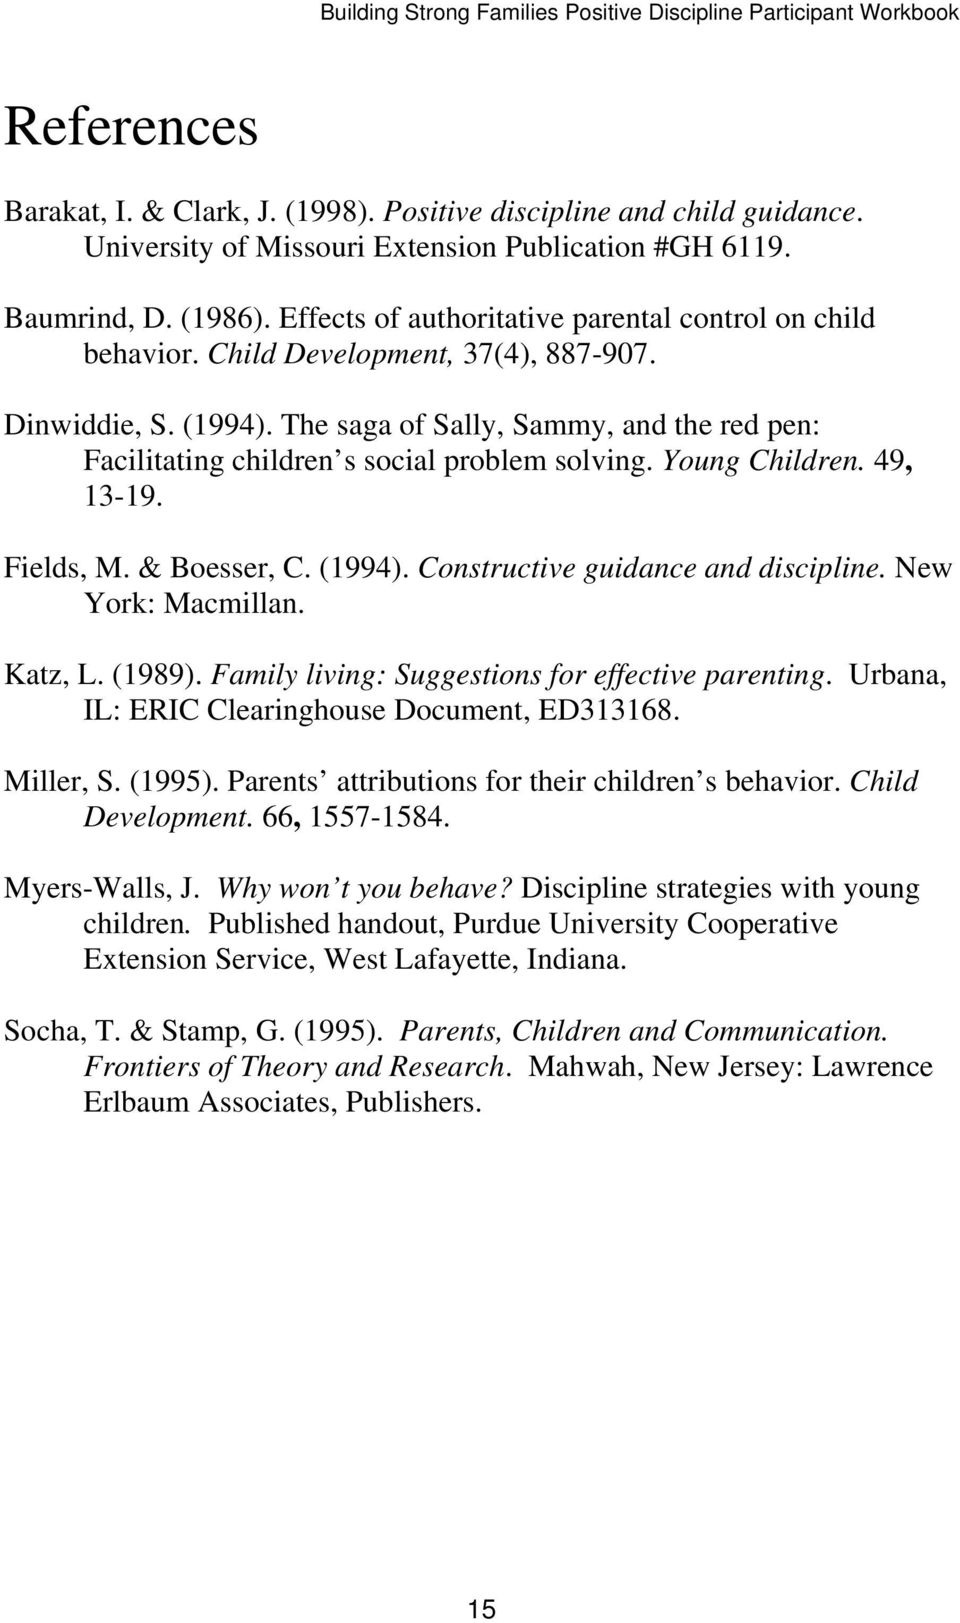 The saga of Sally, Sammy, and the red pen: Facilitating children s social problem solving. Young Children. 49, 13-19. Fields, M. & Boesser, C. (1994). Constructive guidance and discipline.